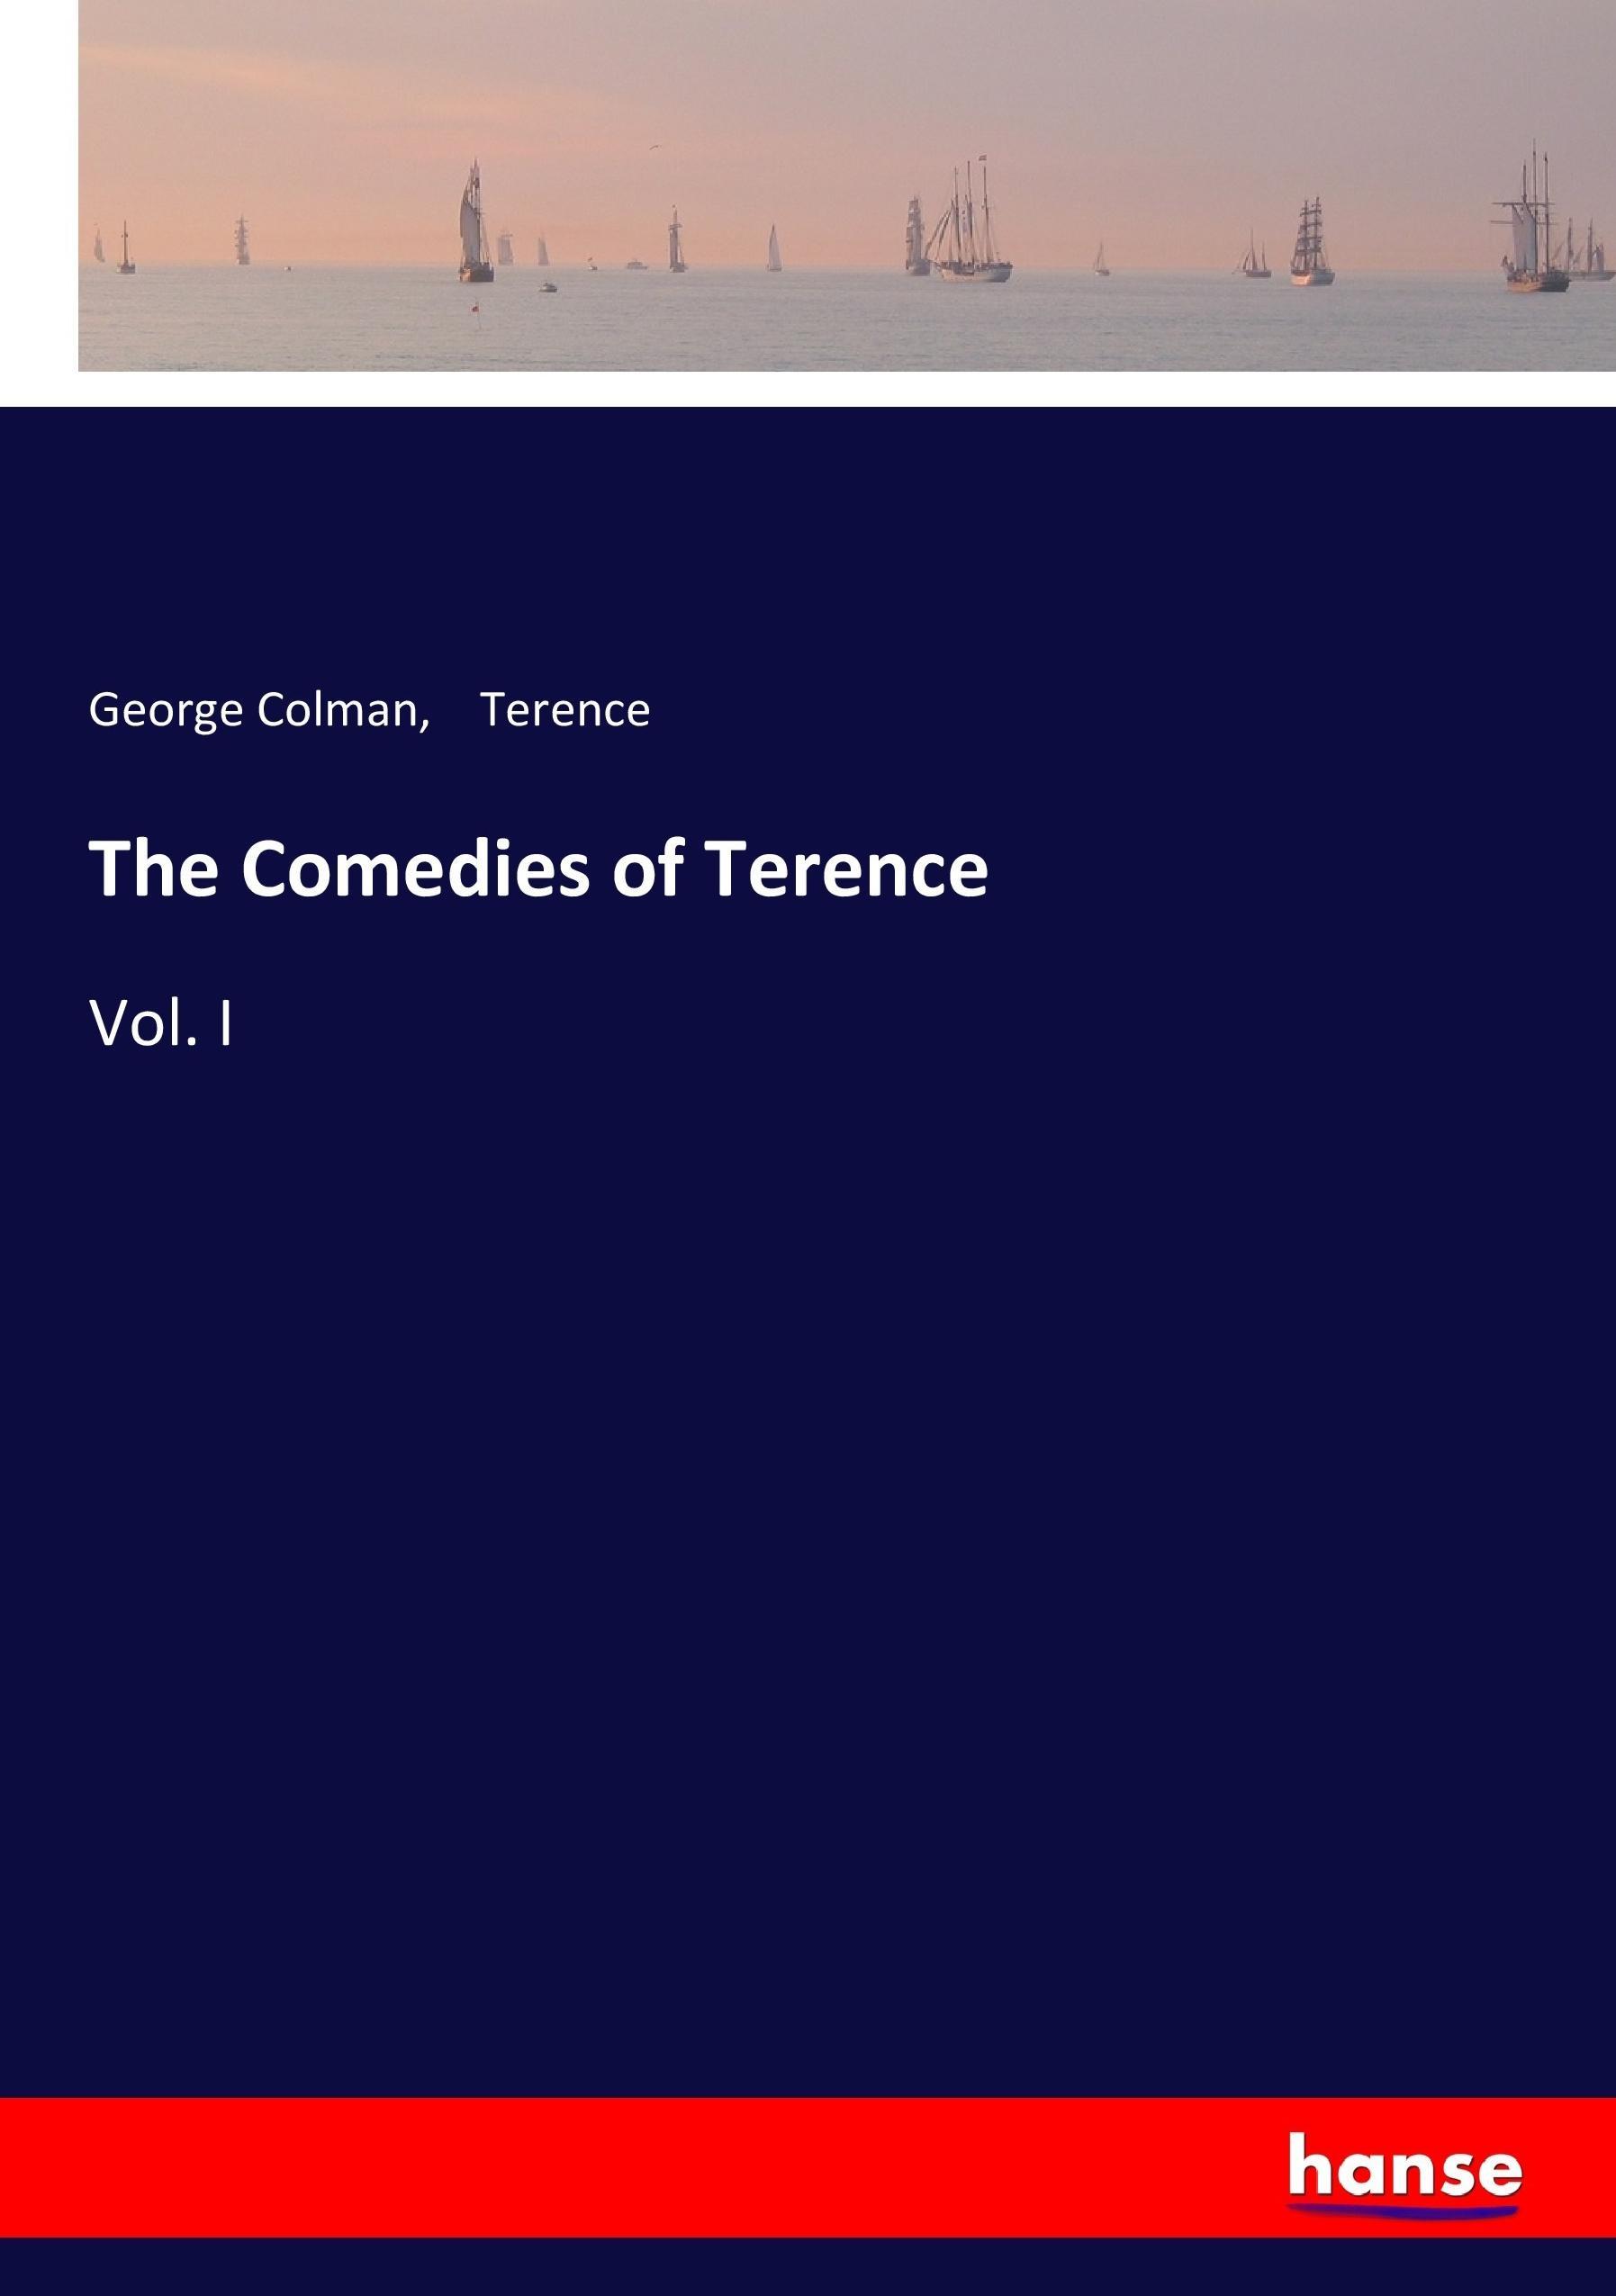 The Comedies of Terence | Vol. I | George Colman (u. a.) | Taschenbuch | Paperback | 440 S. | Englisch | 2017 | hansebooks | EAN 9783744790109 - Colman, George